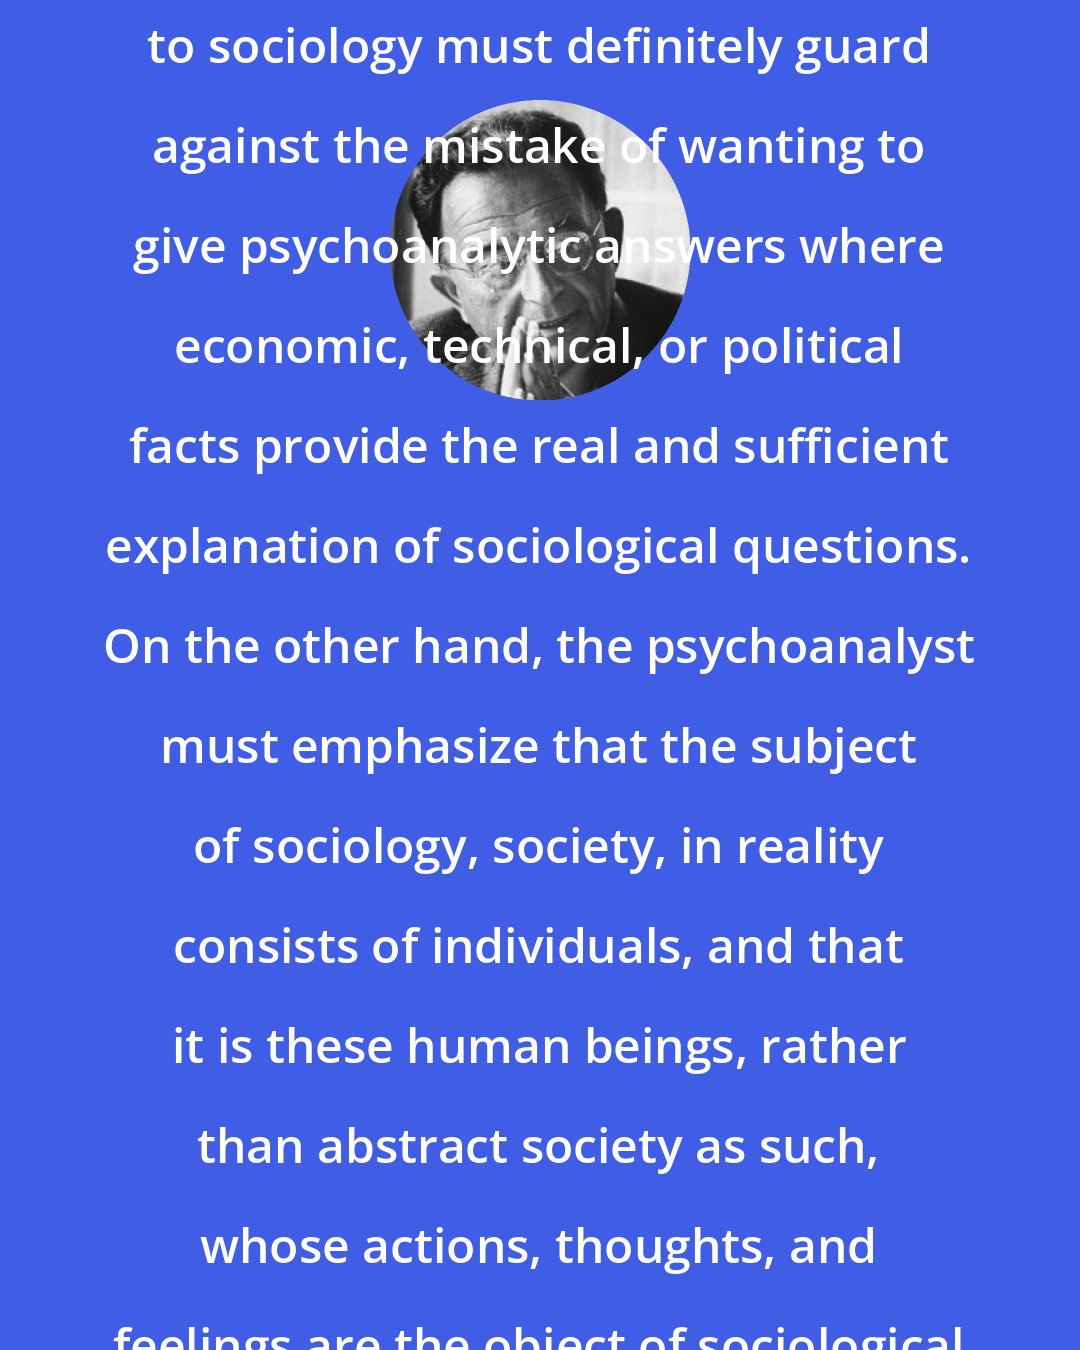 Erich Fromm: The application of psychoanalysis to sociology must definitely guard against the mistake of wanting to give psychoanalytic answers where economic, technical, or political facts provide the real and sufficient explanation of sociological questions. On the other hand, the psychoanalyst must emphasize that the subject of sociology, society, in reality consists of individuals, and that it is these human beings, rather than abstract society as such, whose actions, thoughts, and feelings are the object of sociological research.